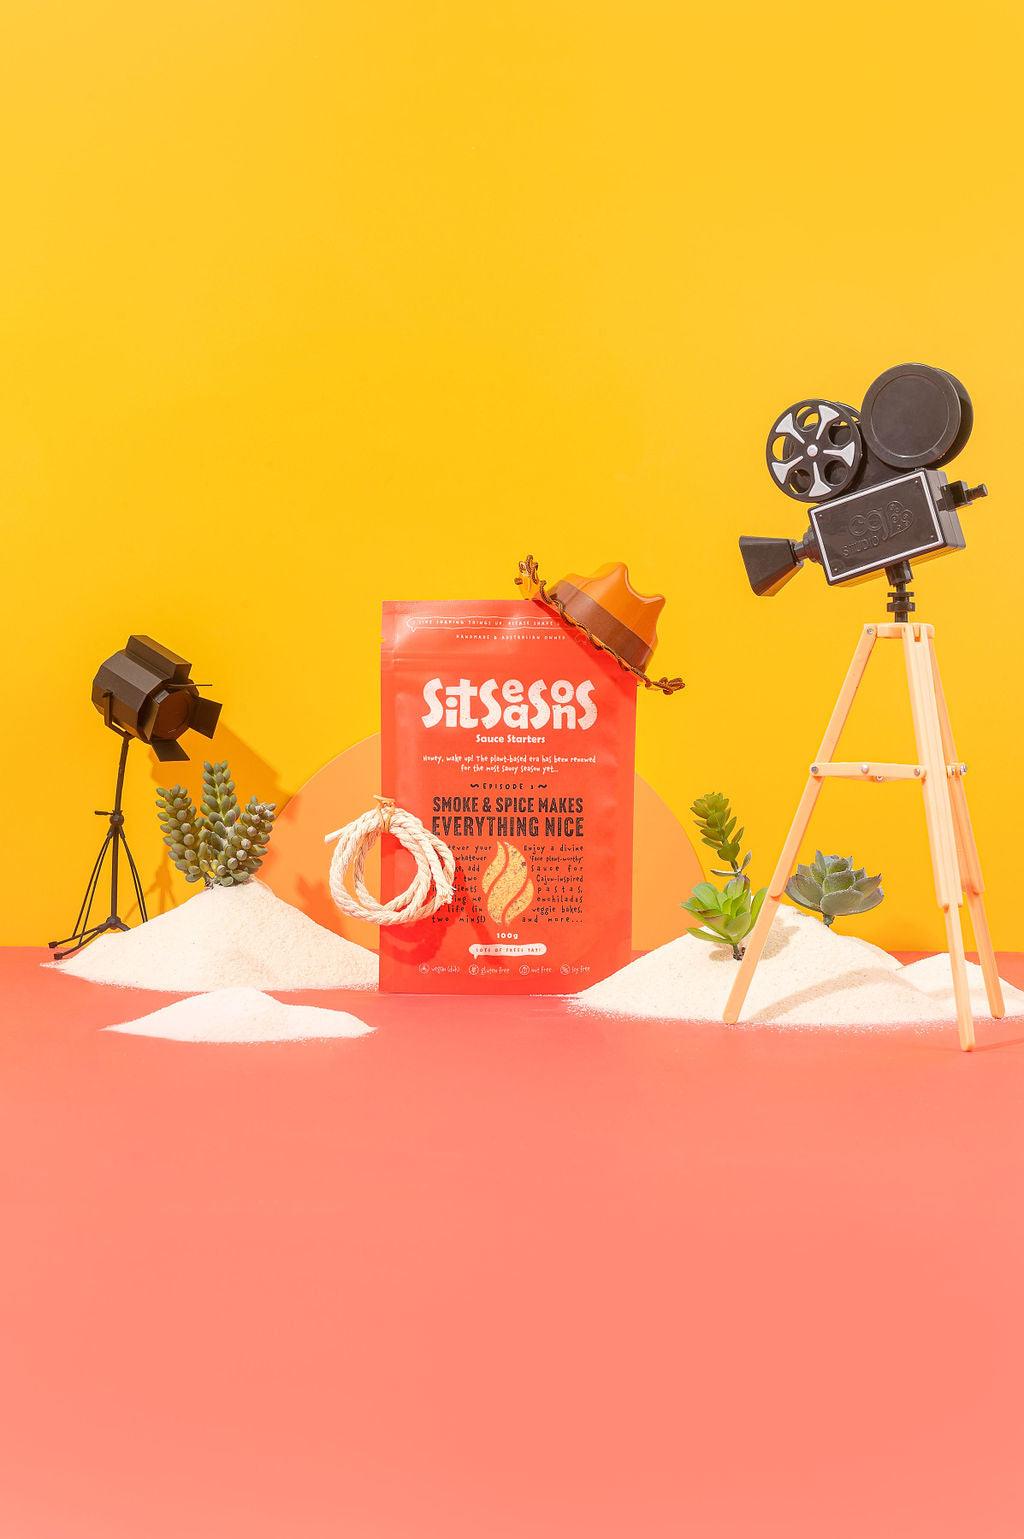 Red smoky spicy seasoning packet wearing a cowboy hat on a Western movie set